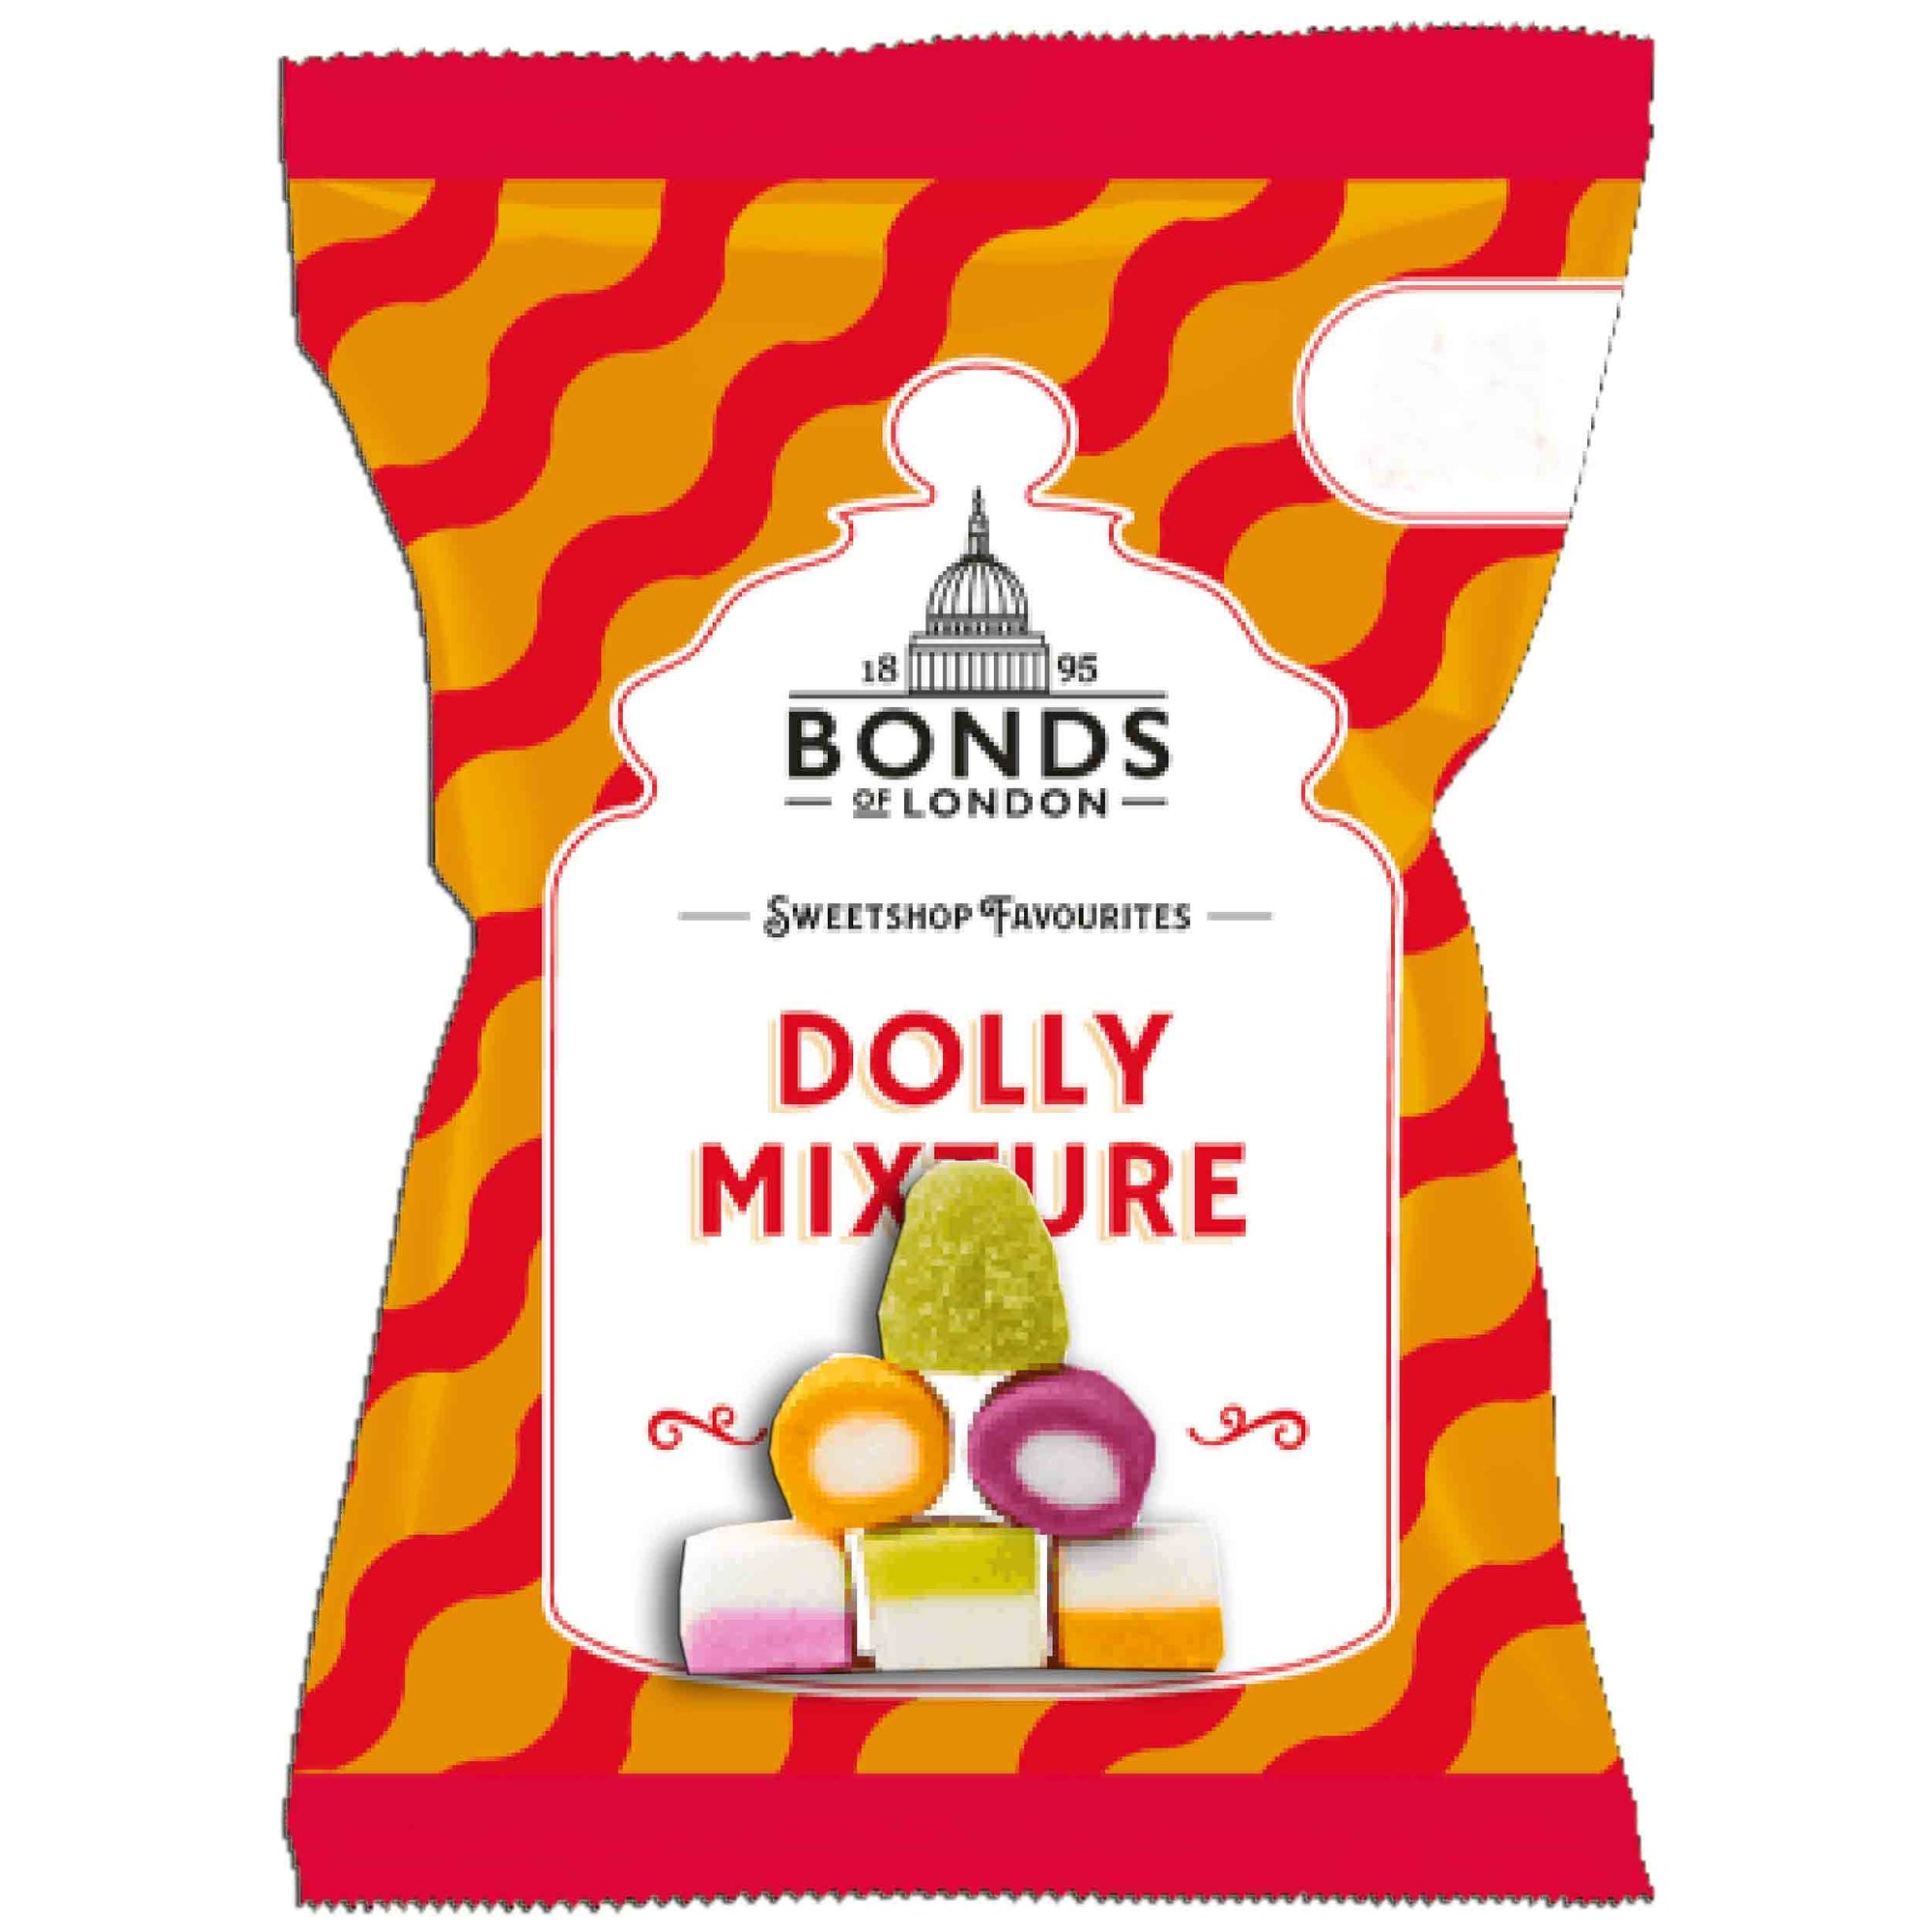 Bonds Dolly Mixture Bags 120g